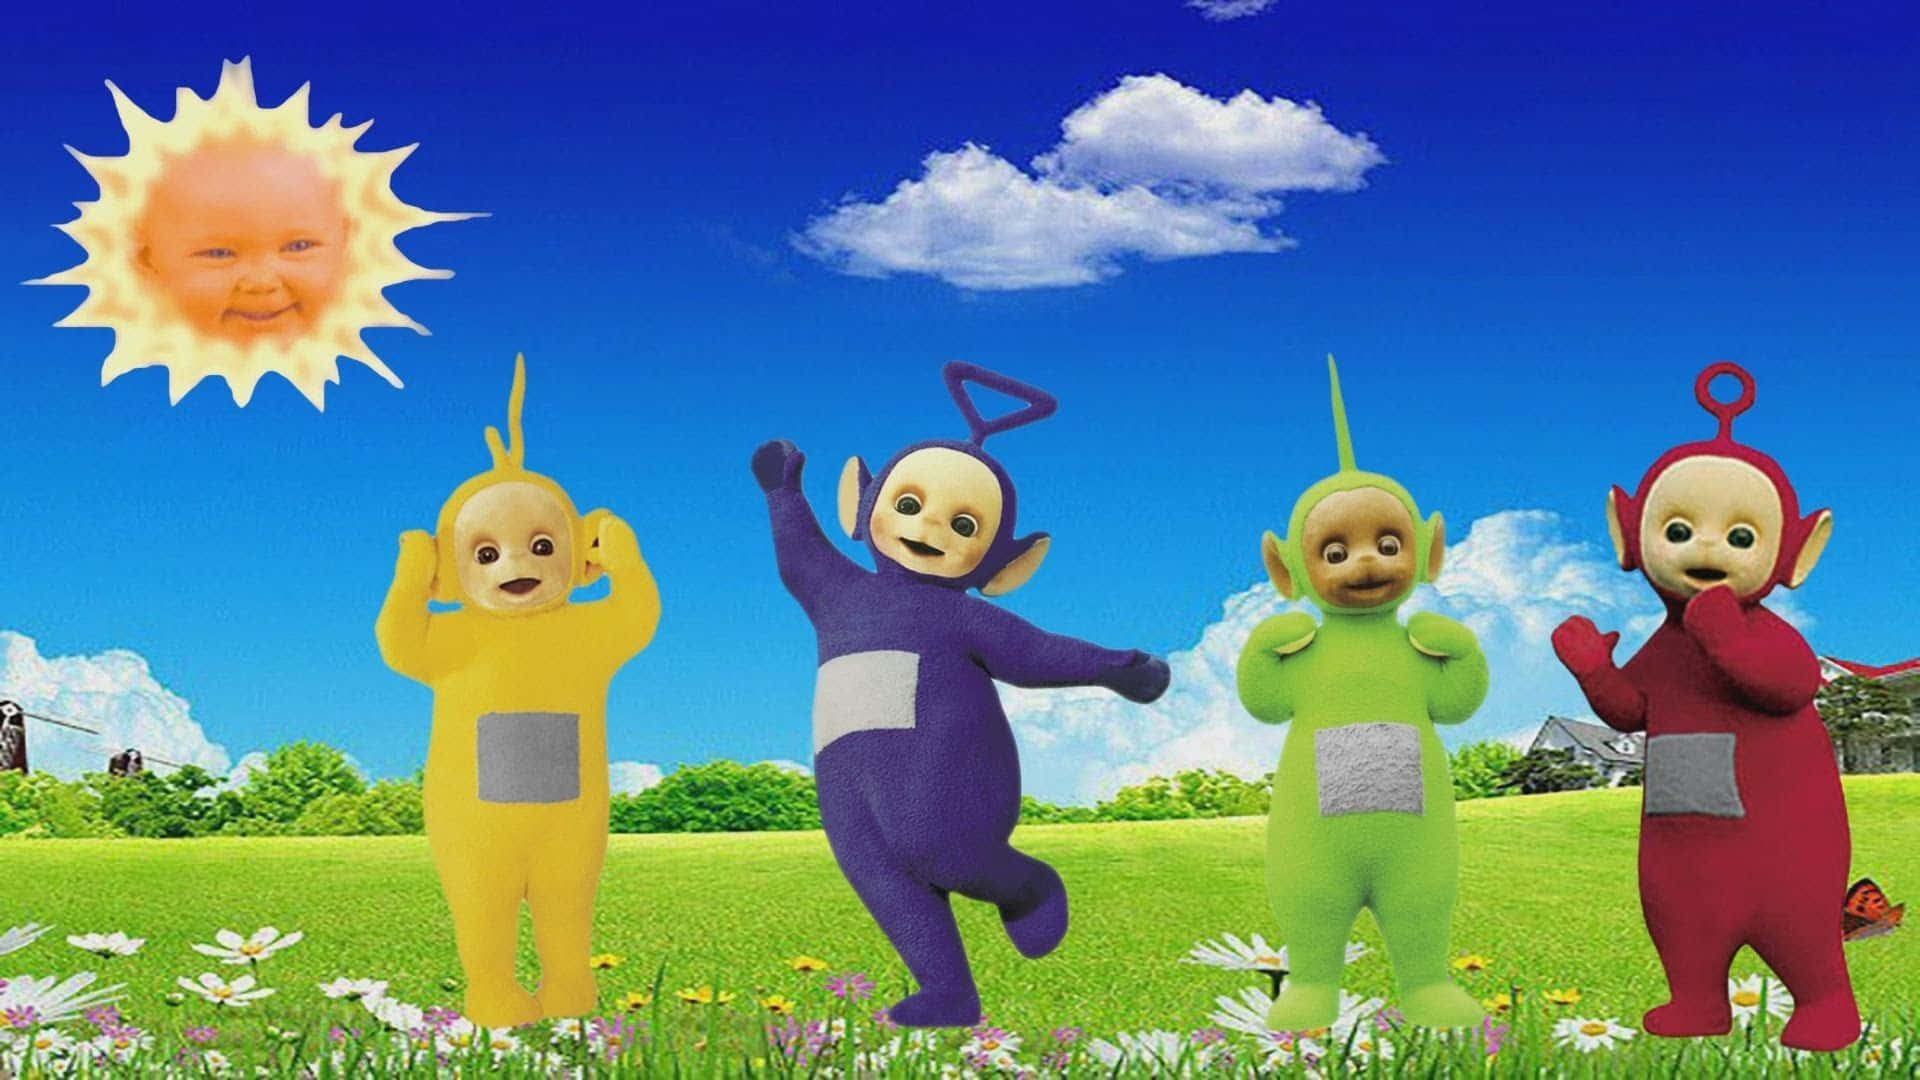 Get Ready for Tinky Winky, Dipsy, Laa-Laa and Po's Adventures!